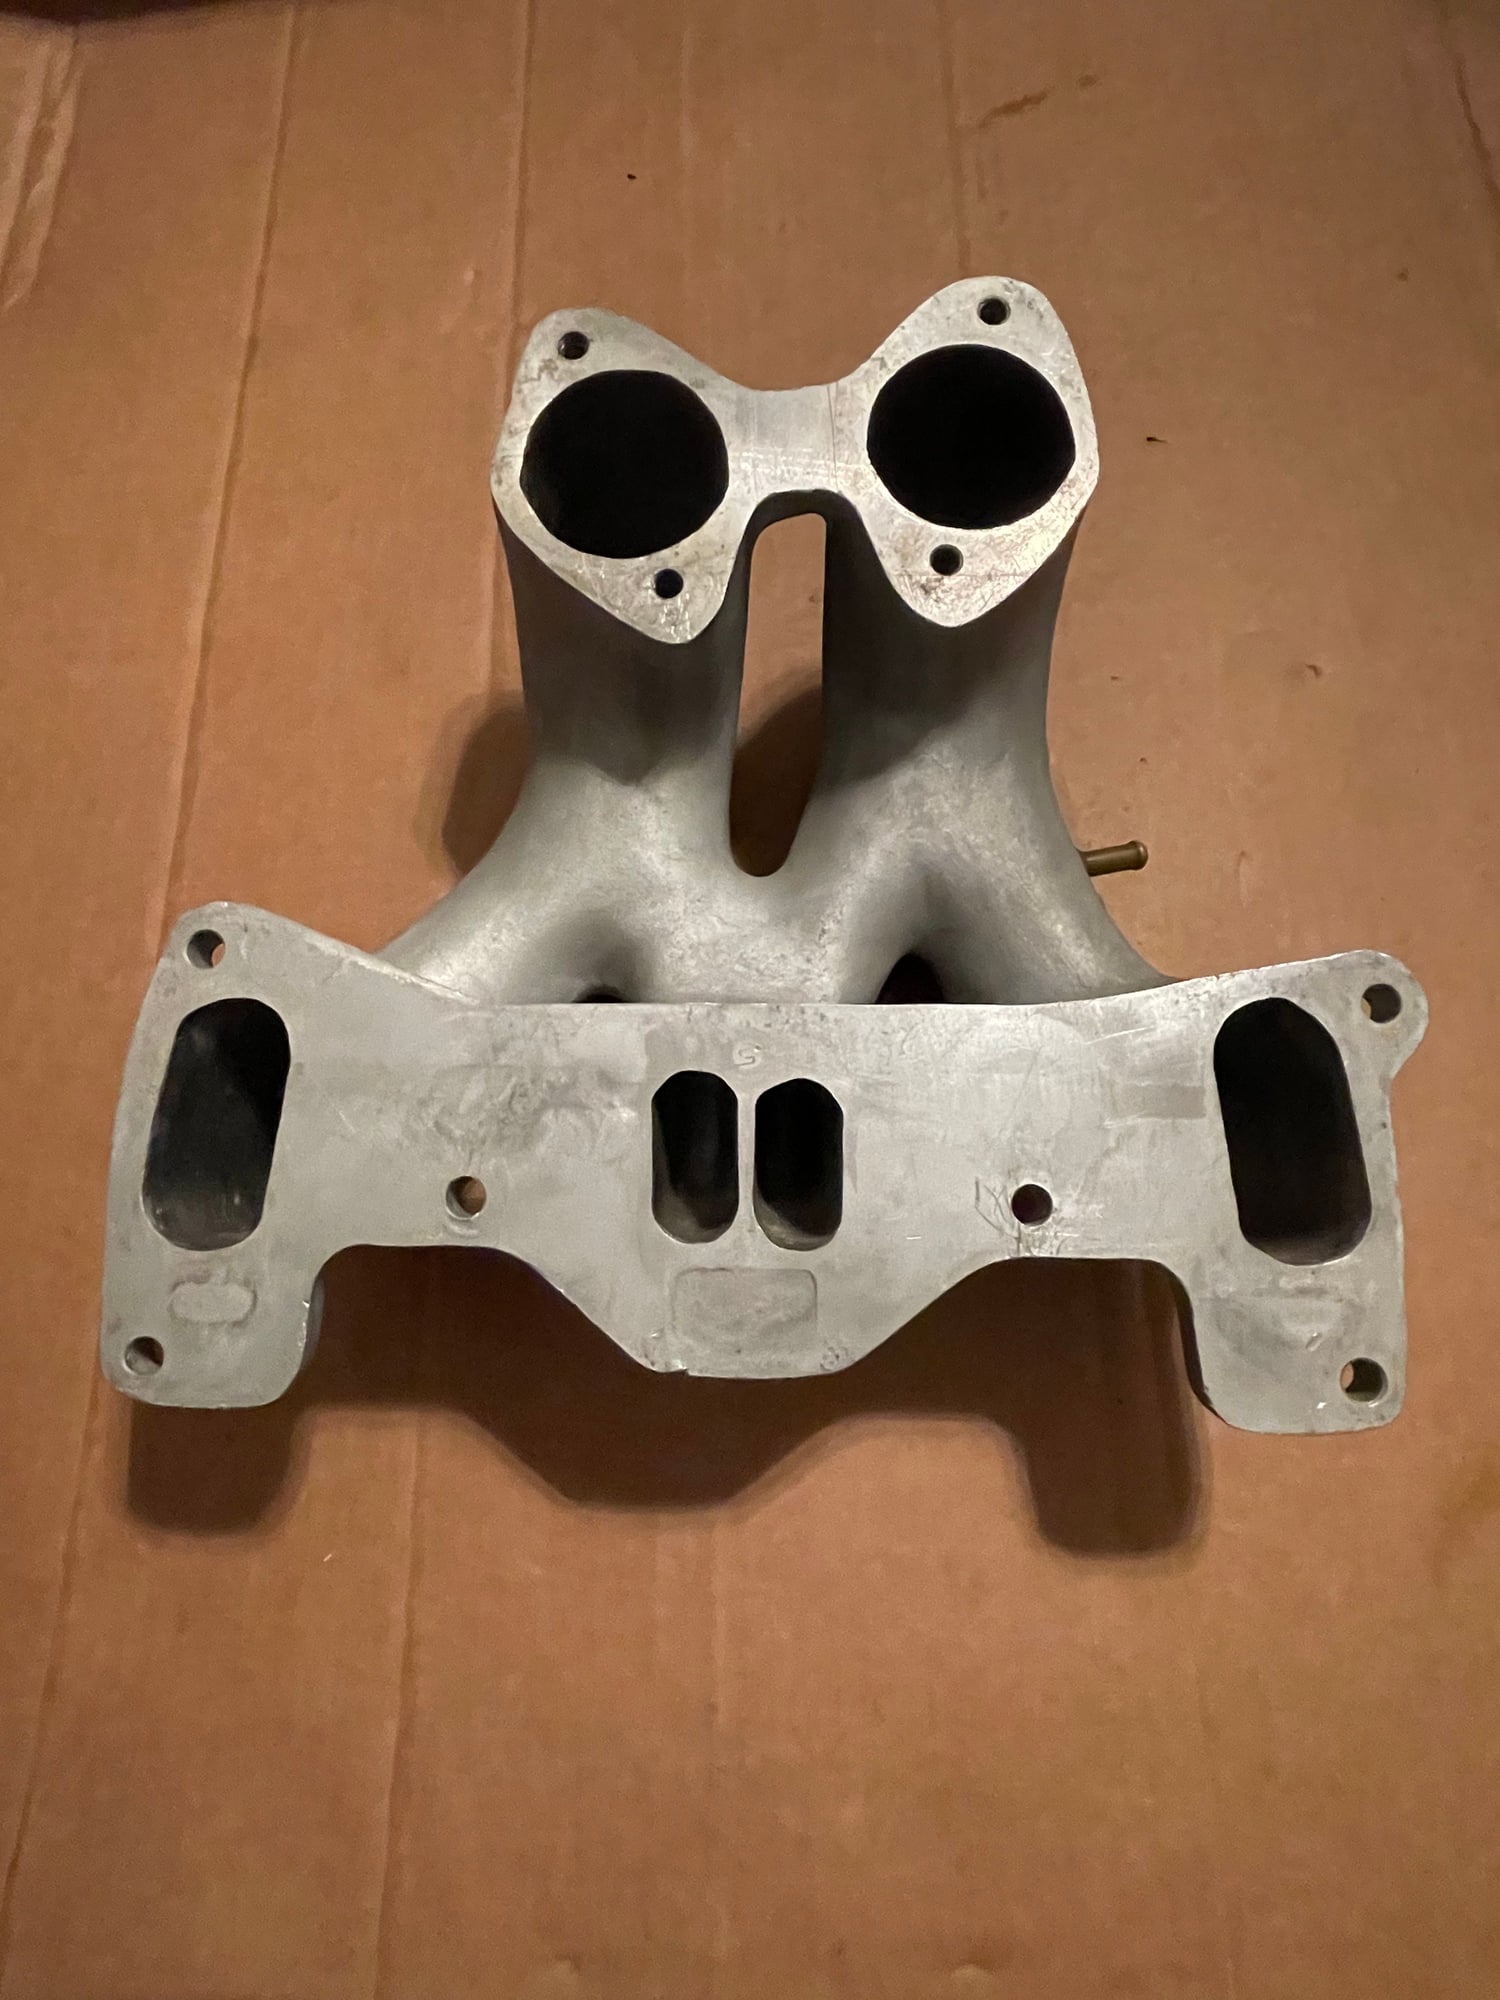 Engine - Intake/Fuel - 13B 84-91 Side Draft Cast Intake Manifold One Piece - New - Chicago, IL 60630, United States